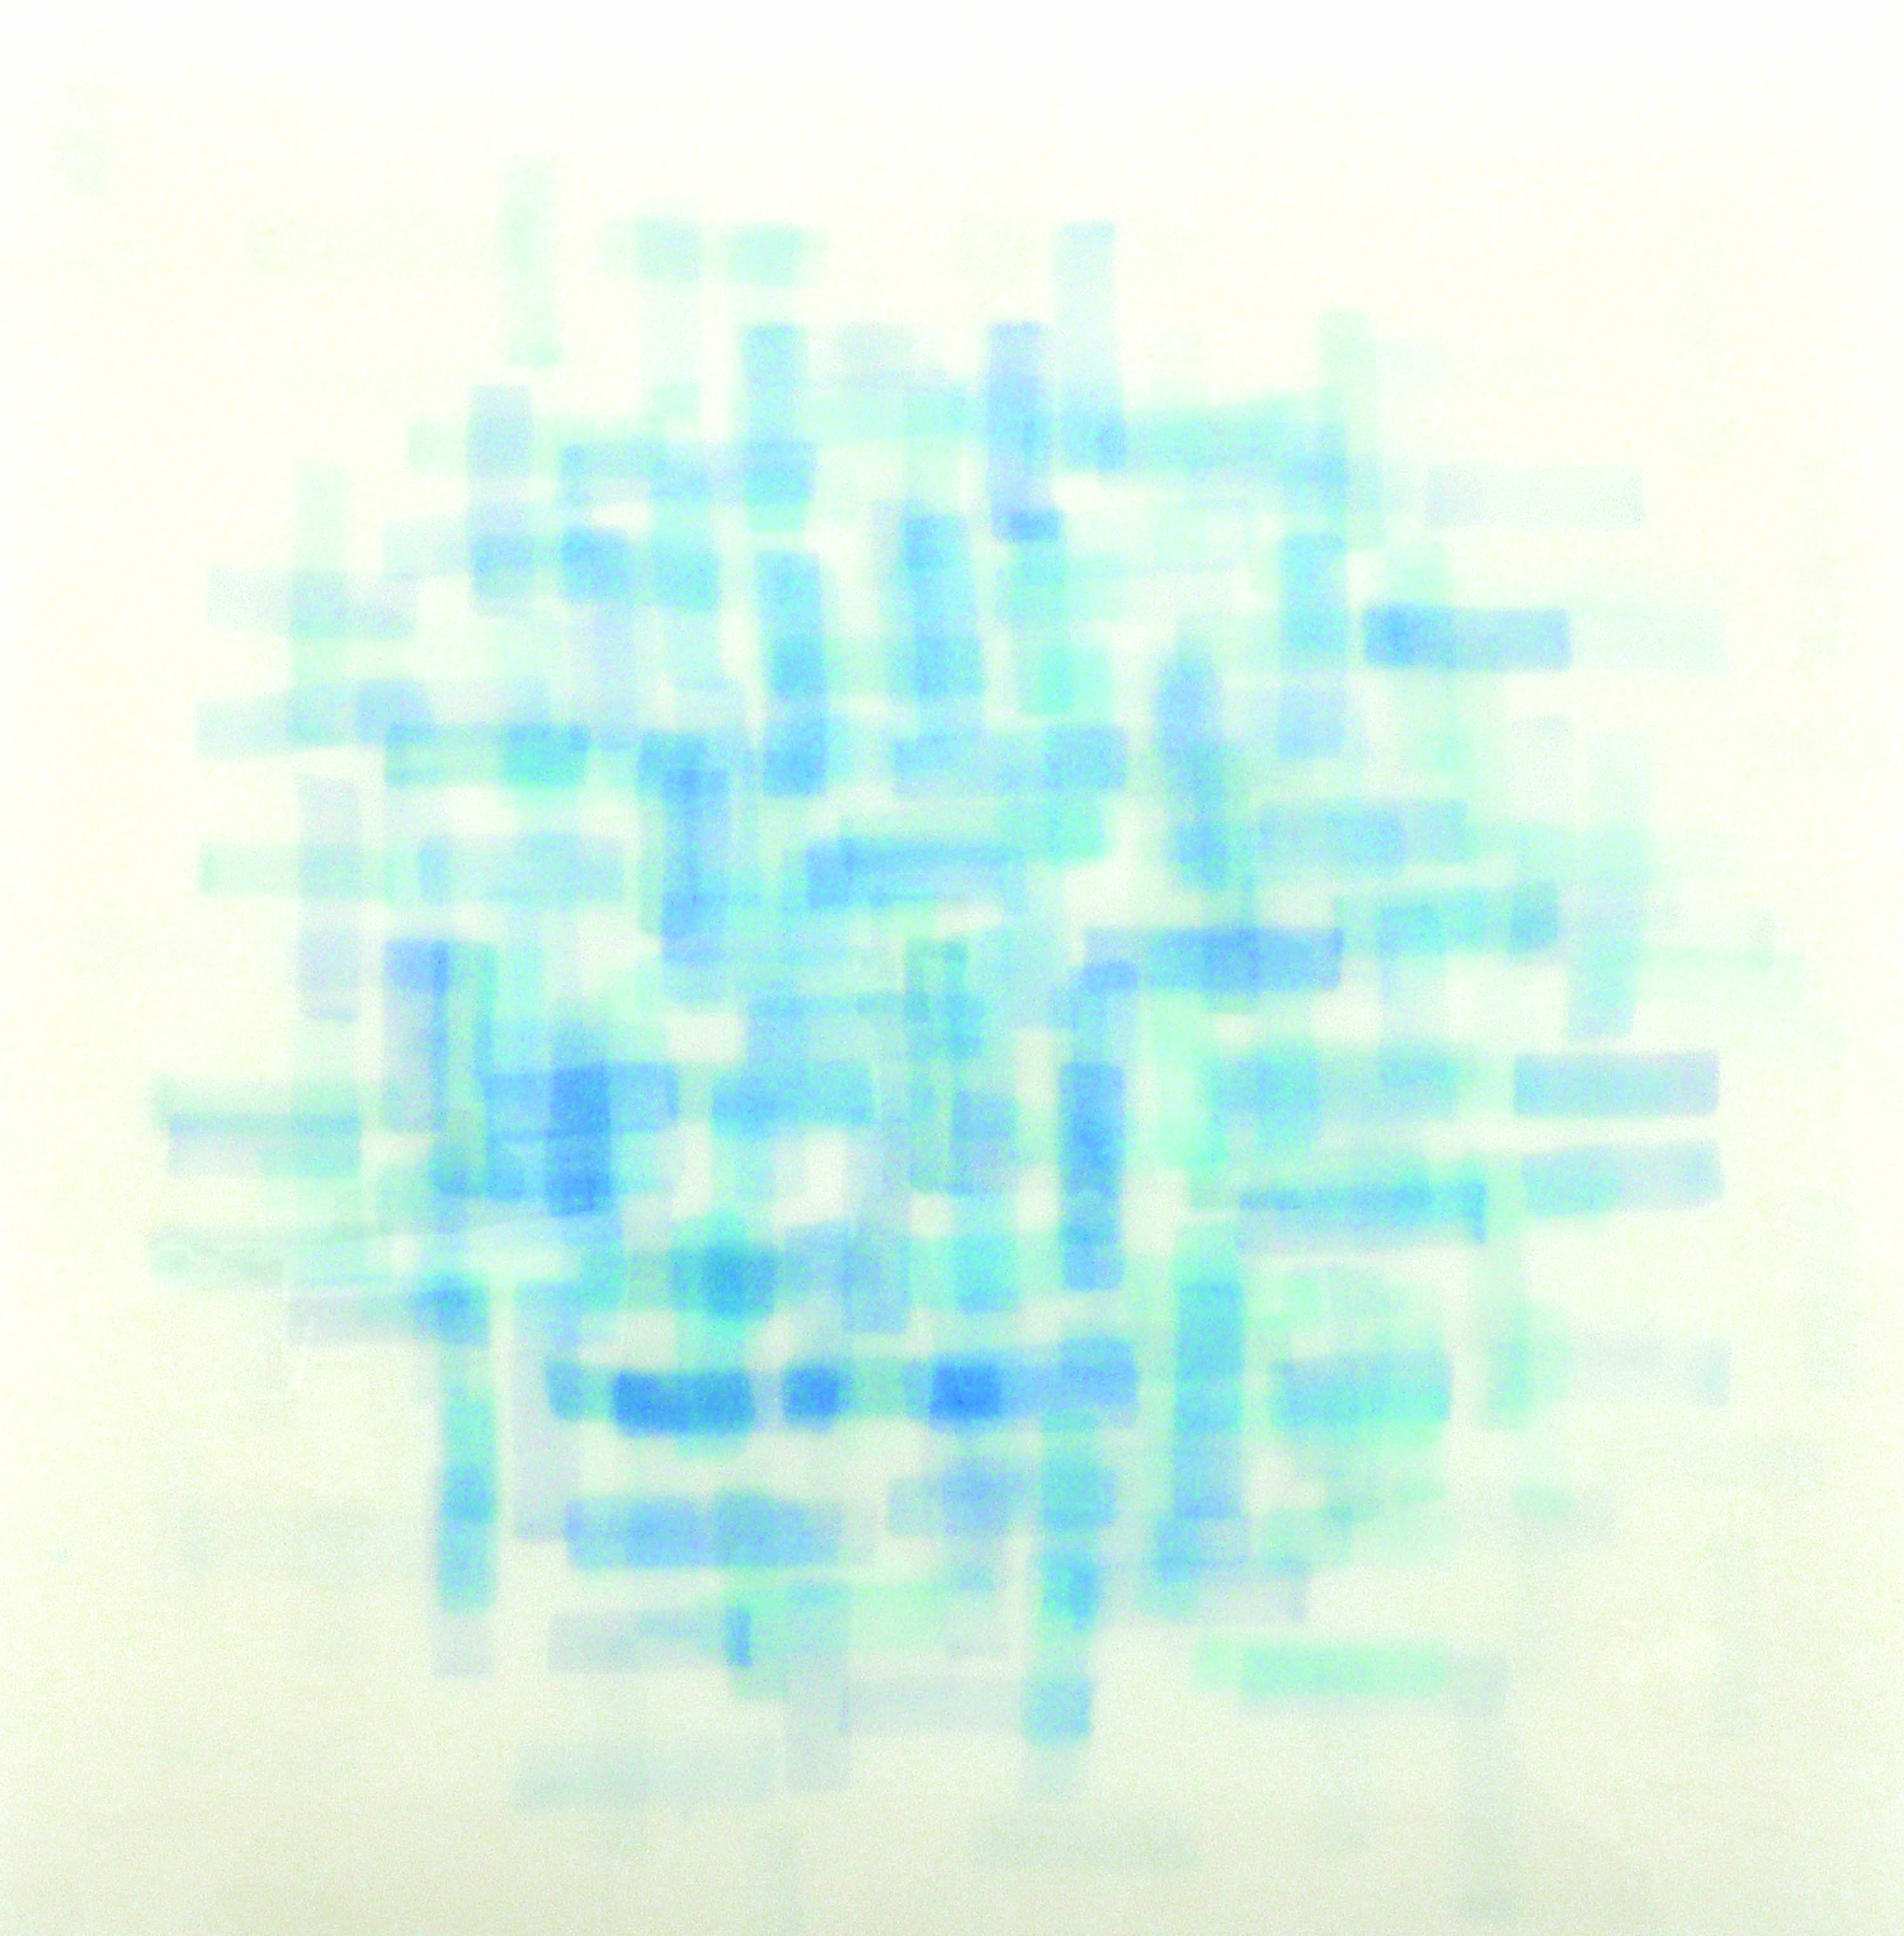 <h3>MIKE SOLOMON</h3>
						<h4><em>Engender</em></h4>
						2012</br>Watercolor, mulberry paper, and epoxy</br>
						36 x 36 inches</br>
                        